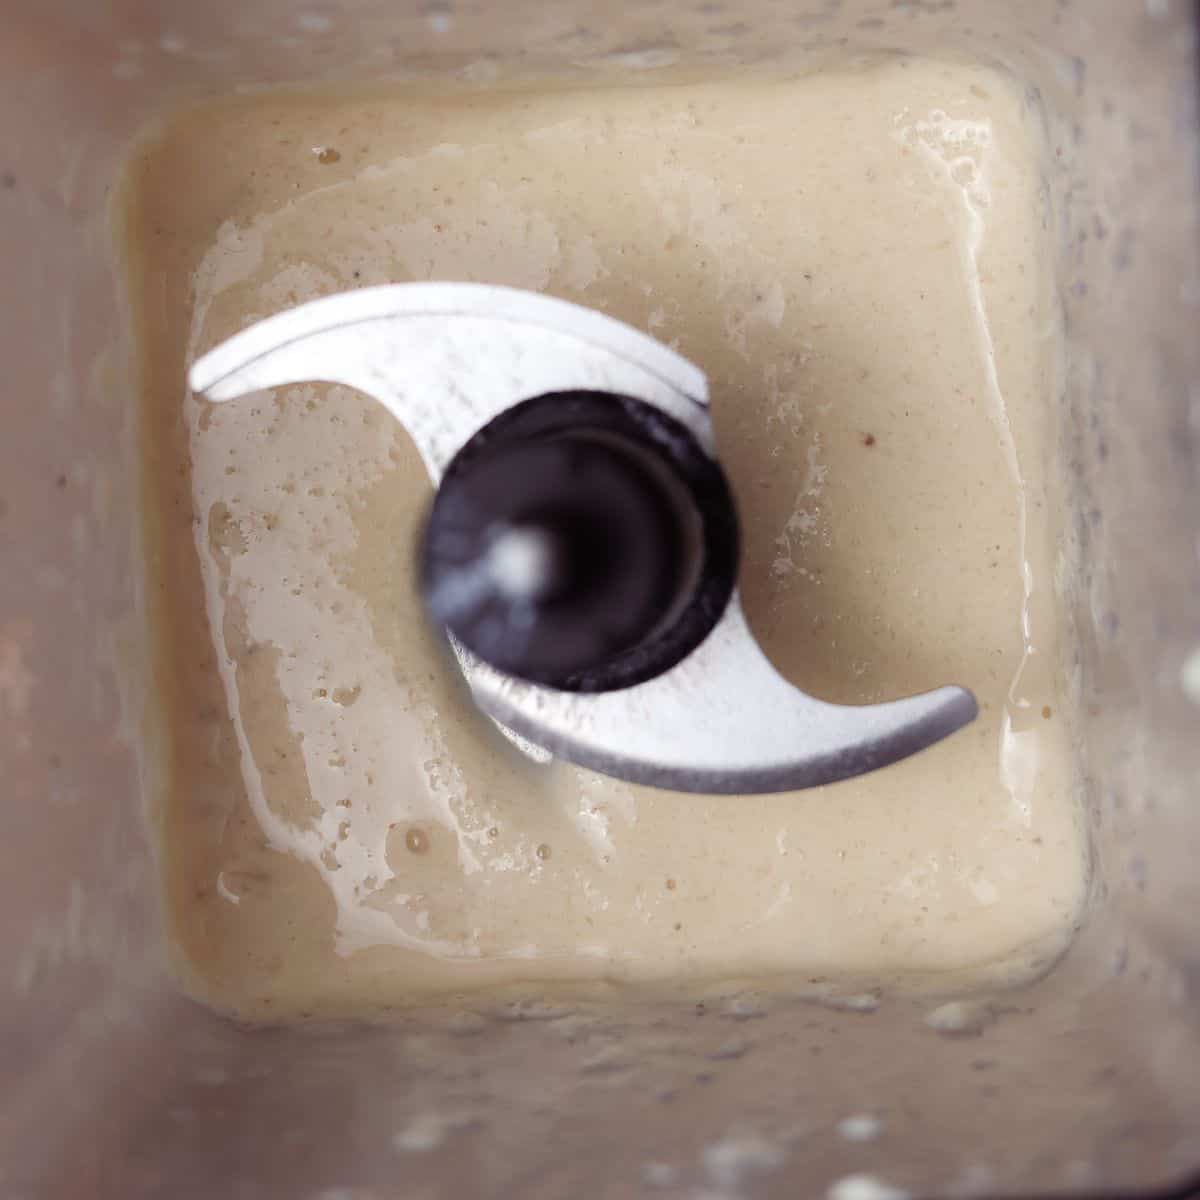 Top view inside a blender showing the initial creamy blend of the Banana Boat Smoothie ingredients.